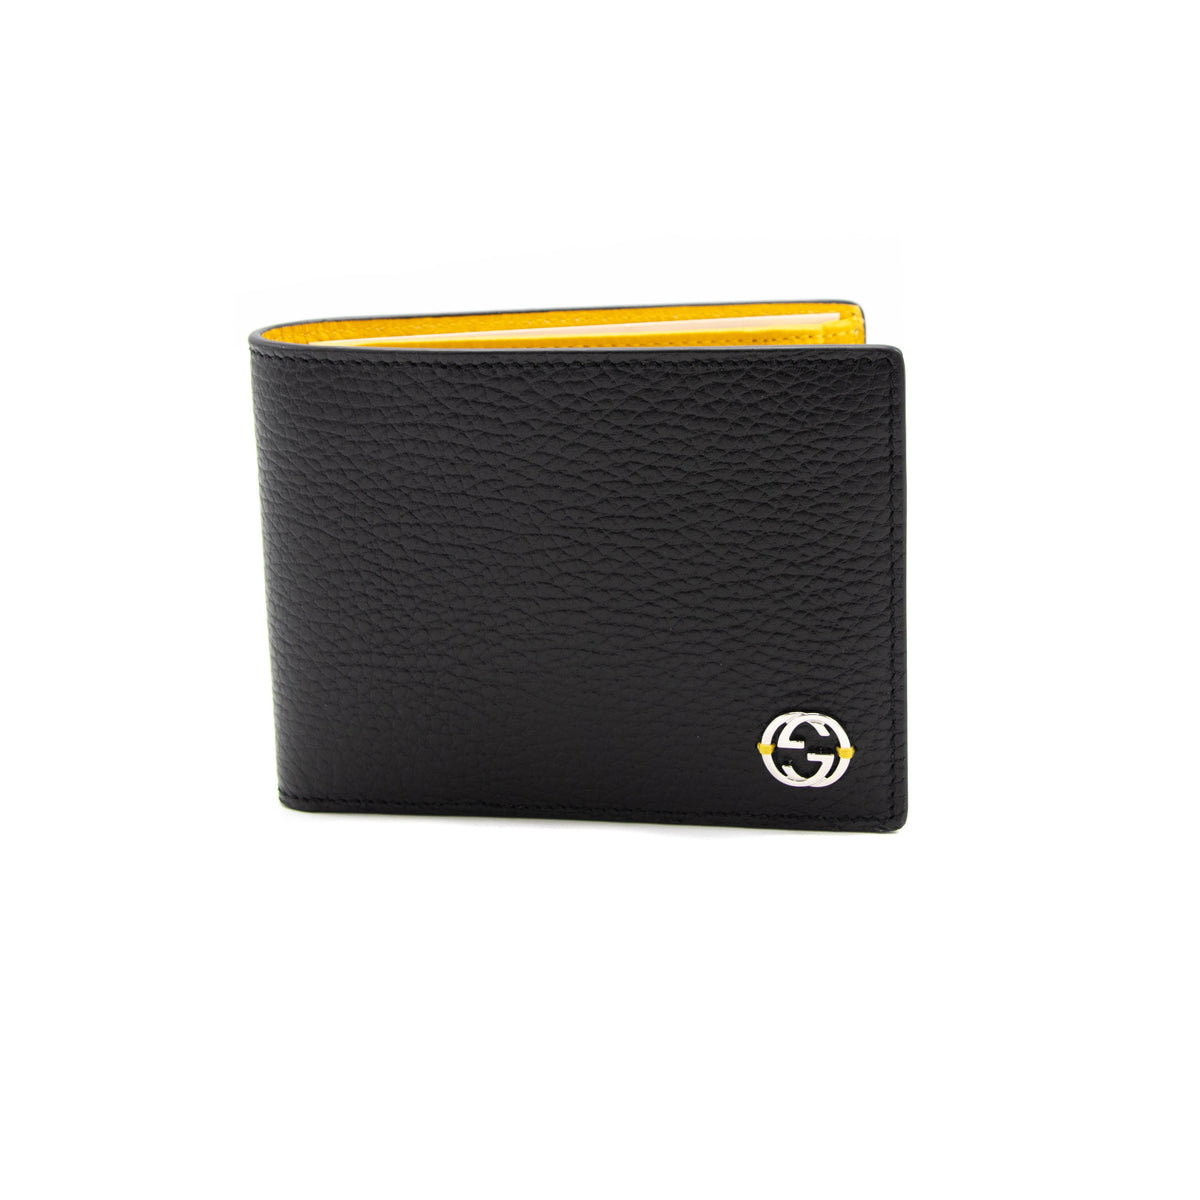 Black Leather Gucci Wallet